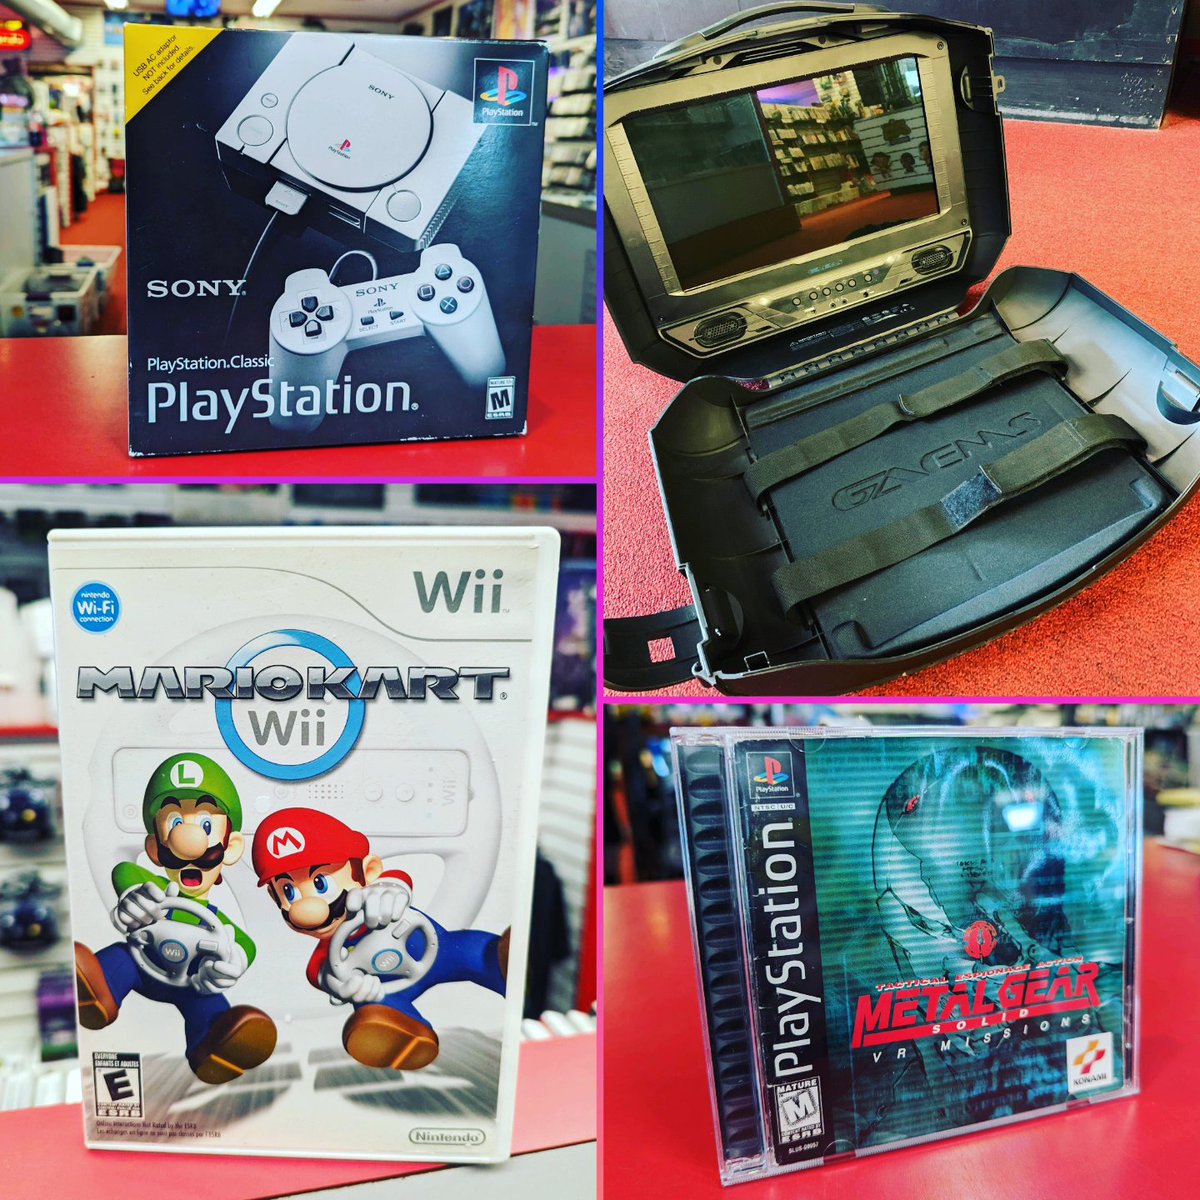 A number of awesome Gamecube and N64 games were among our trade highlights yesterday!

#digitalpress #videogames #thisjustin #tradein #retrogames #retrogamestore #retrogaming #gameon